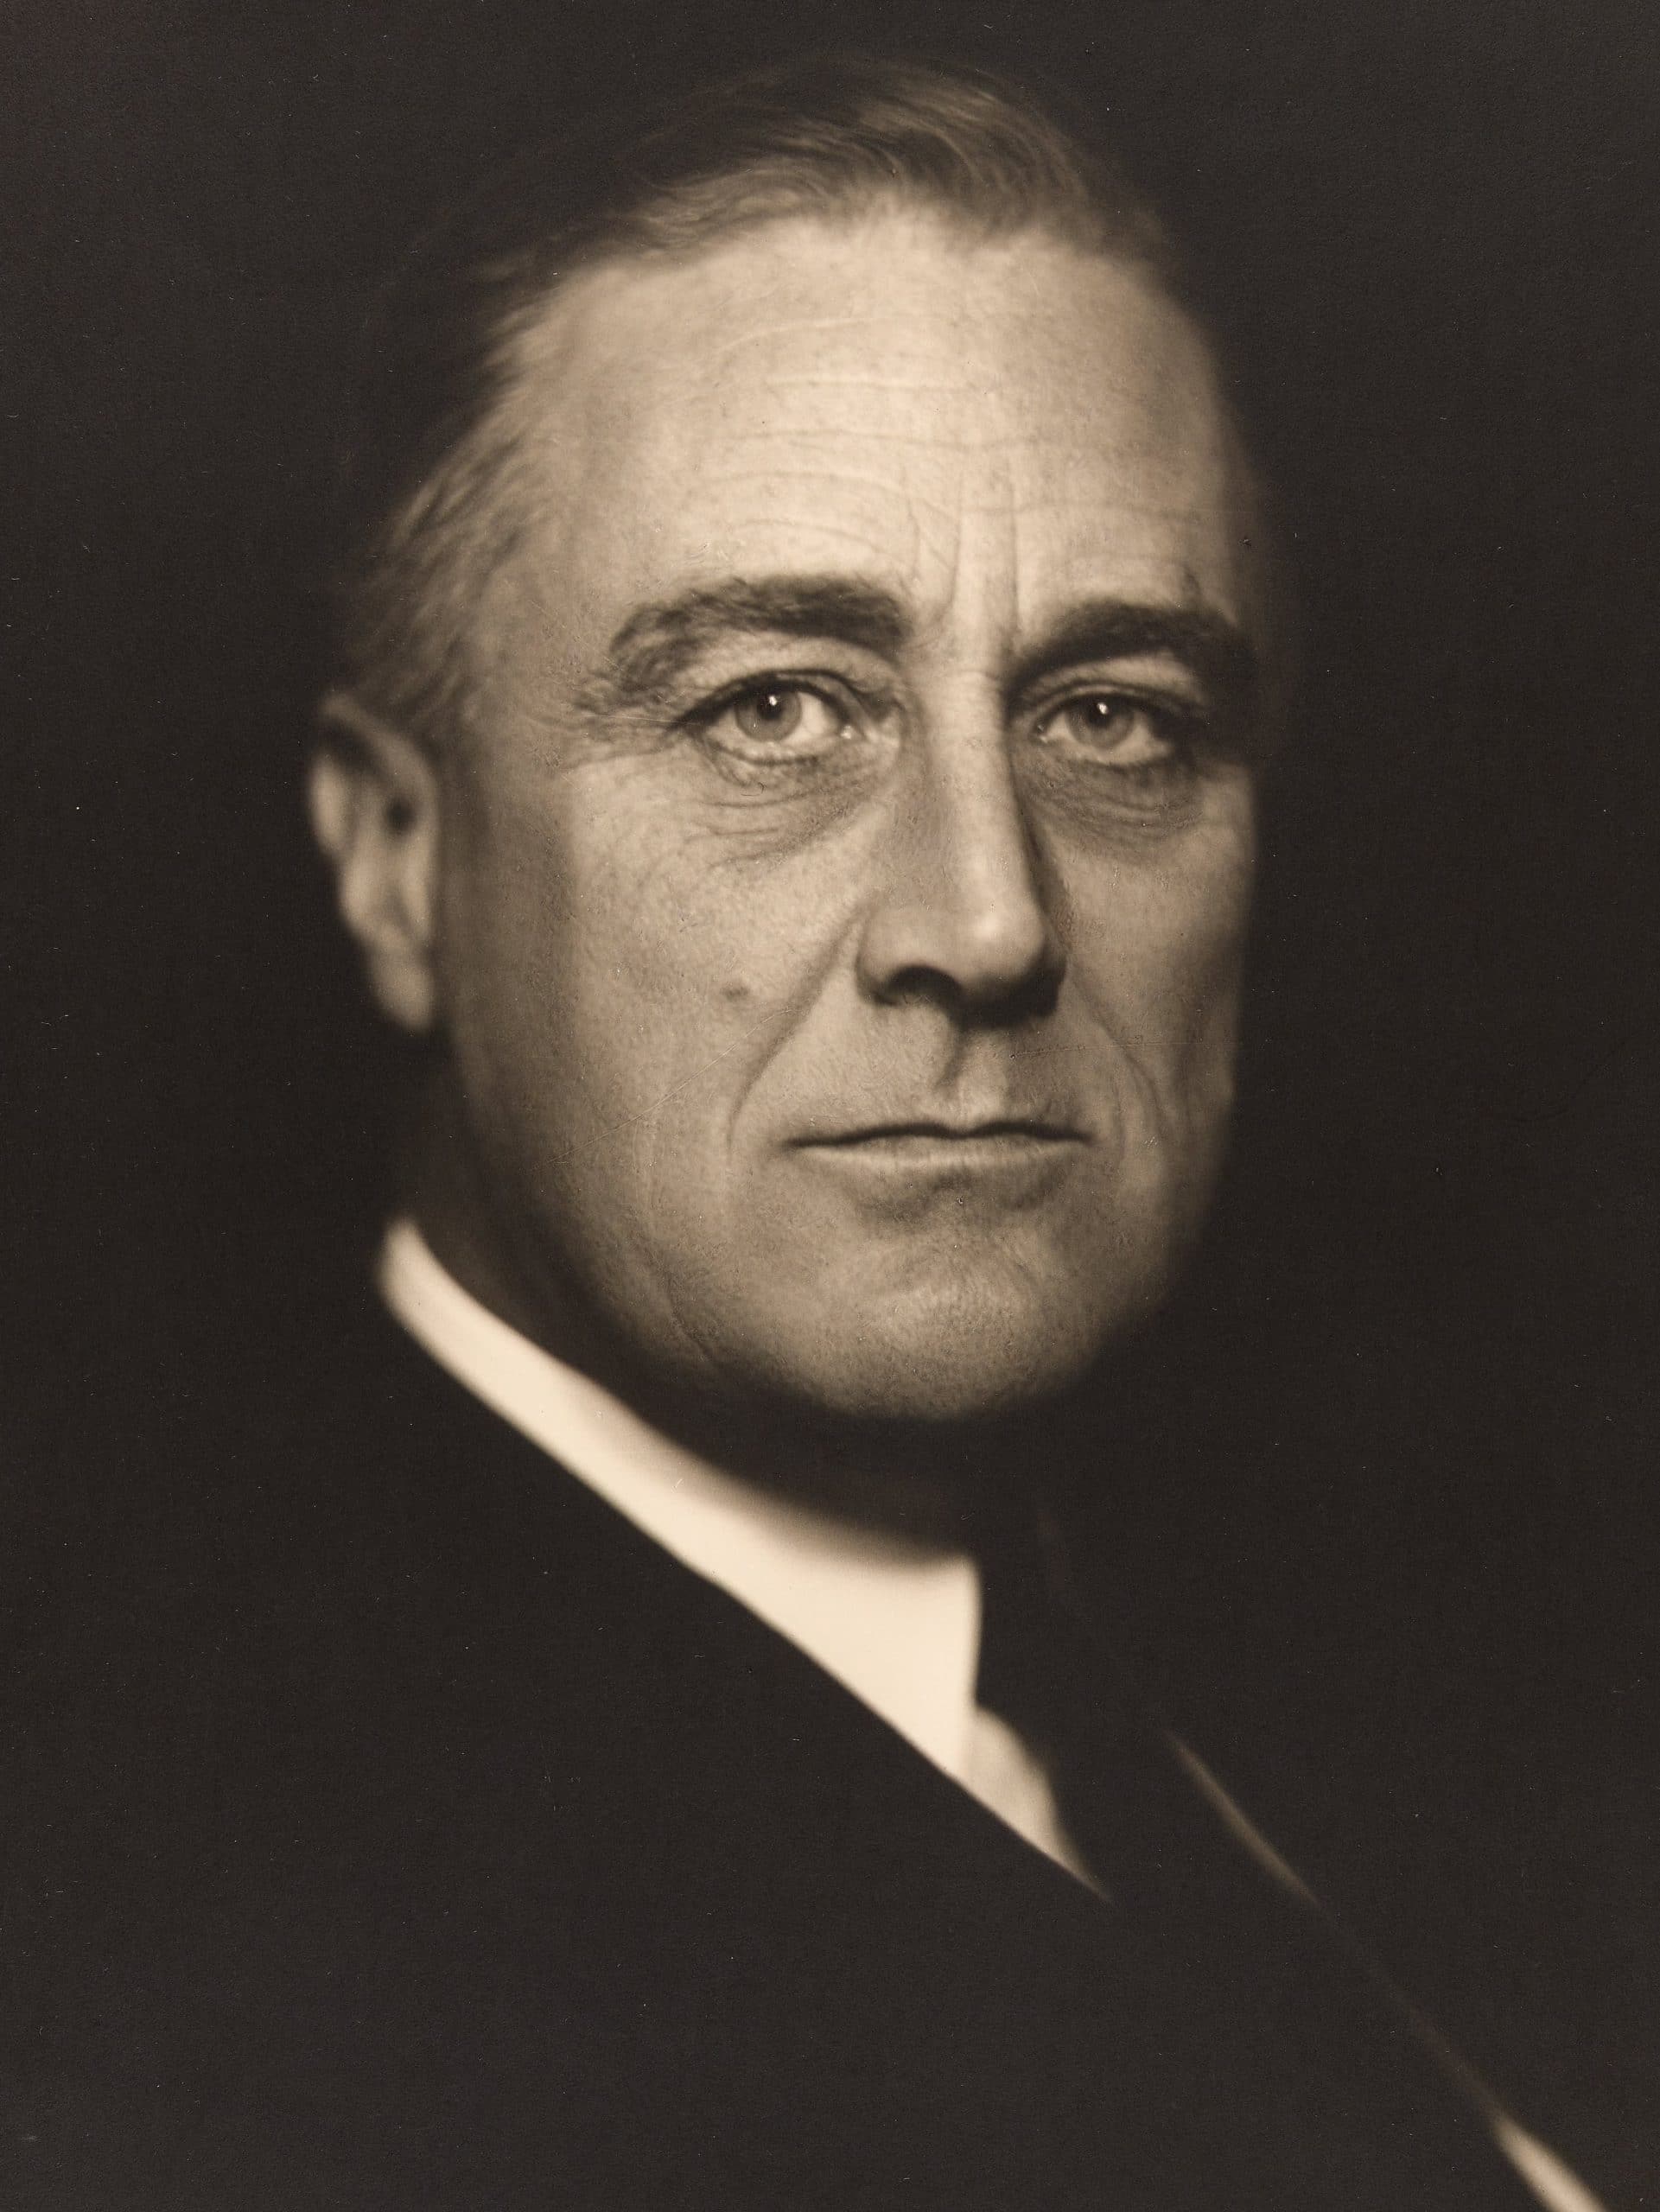 Franklin Roosevelt would propose establishing the Civilian Conservation Crops which would become the first program of a Green New Deal.